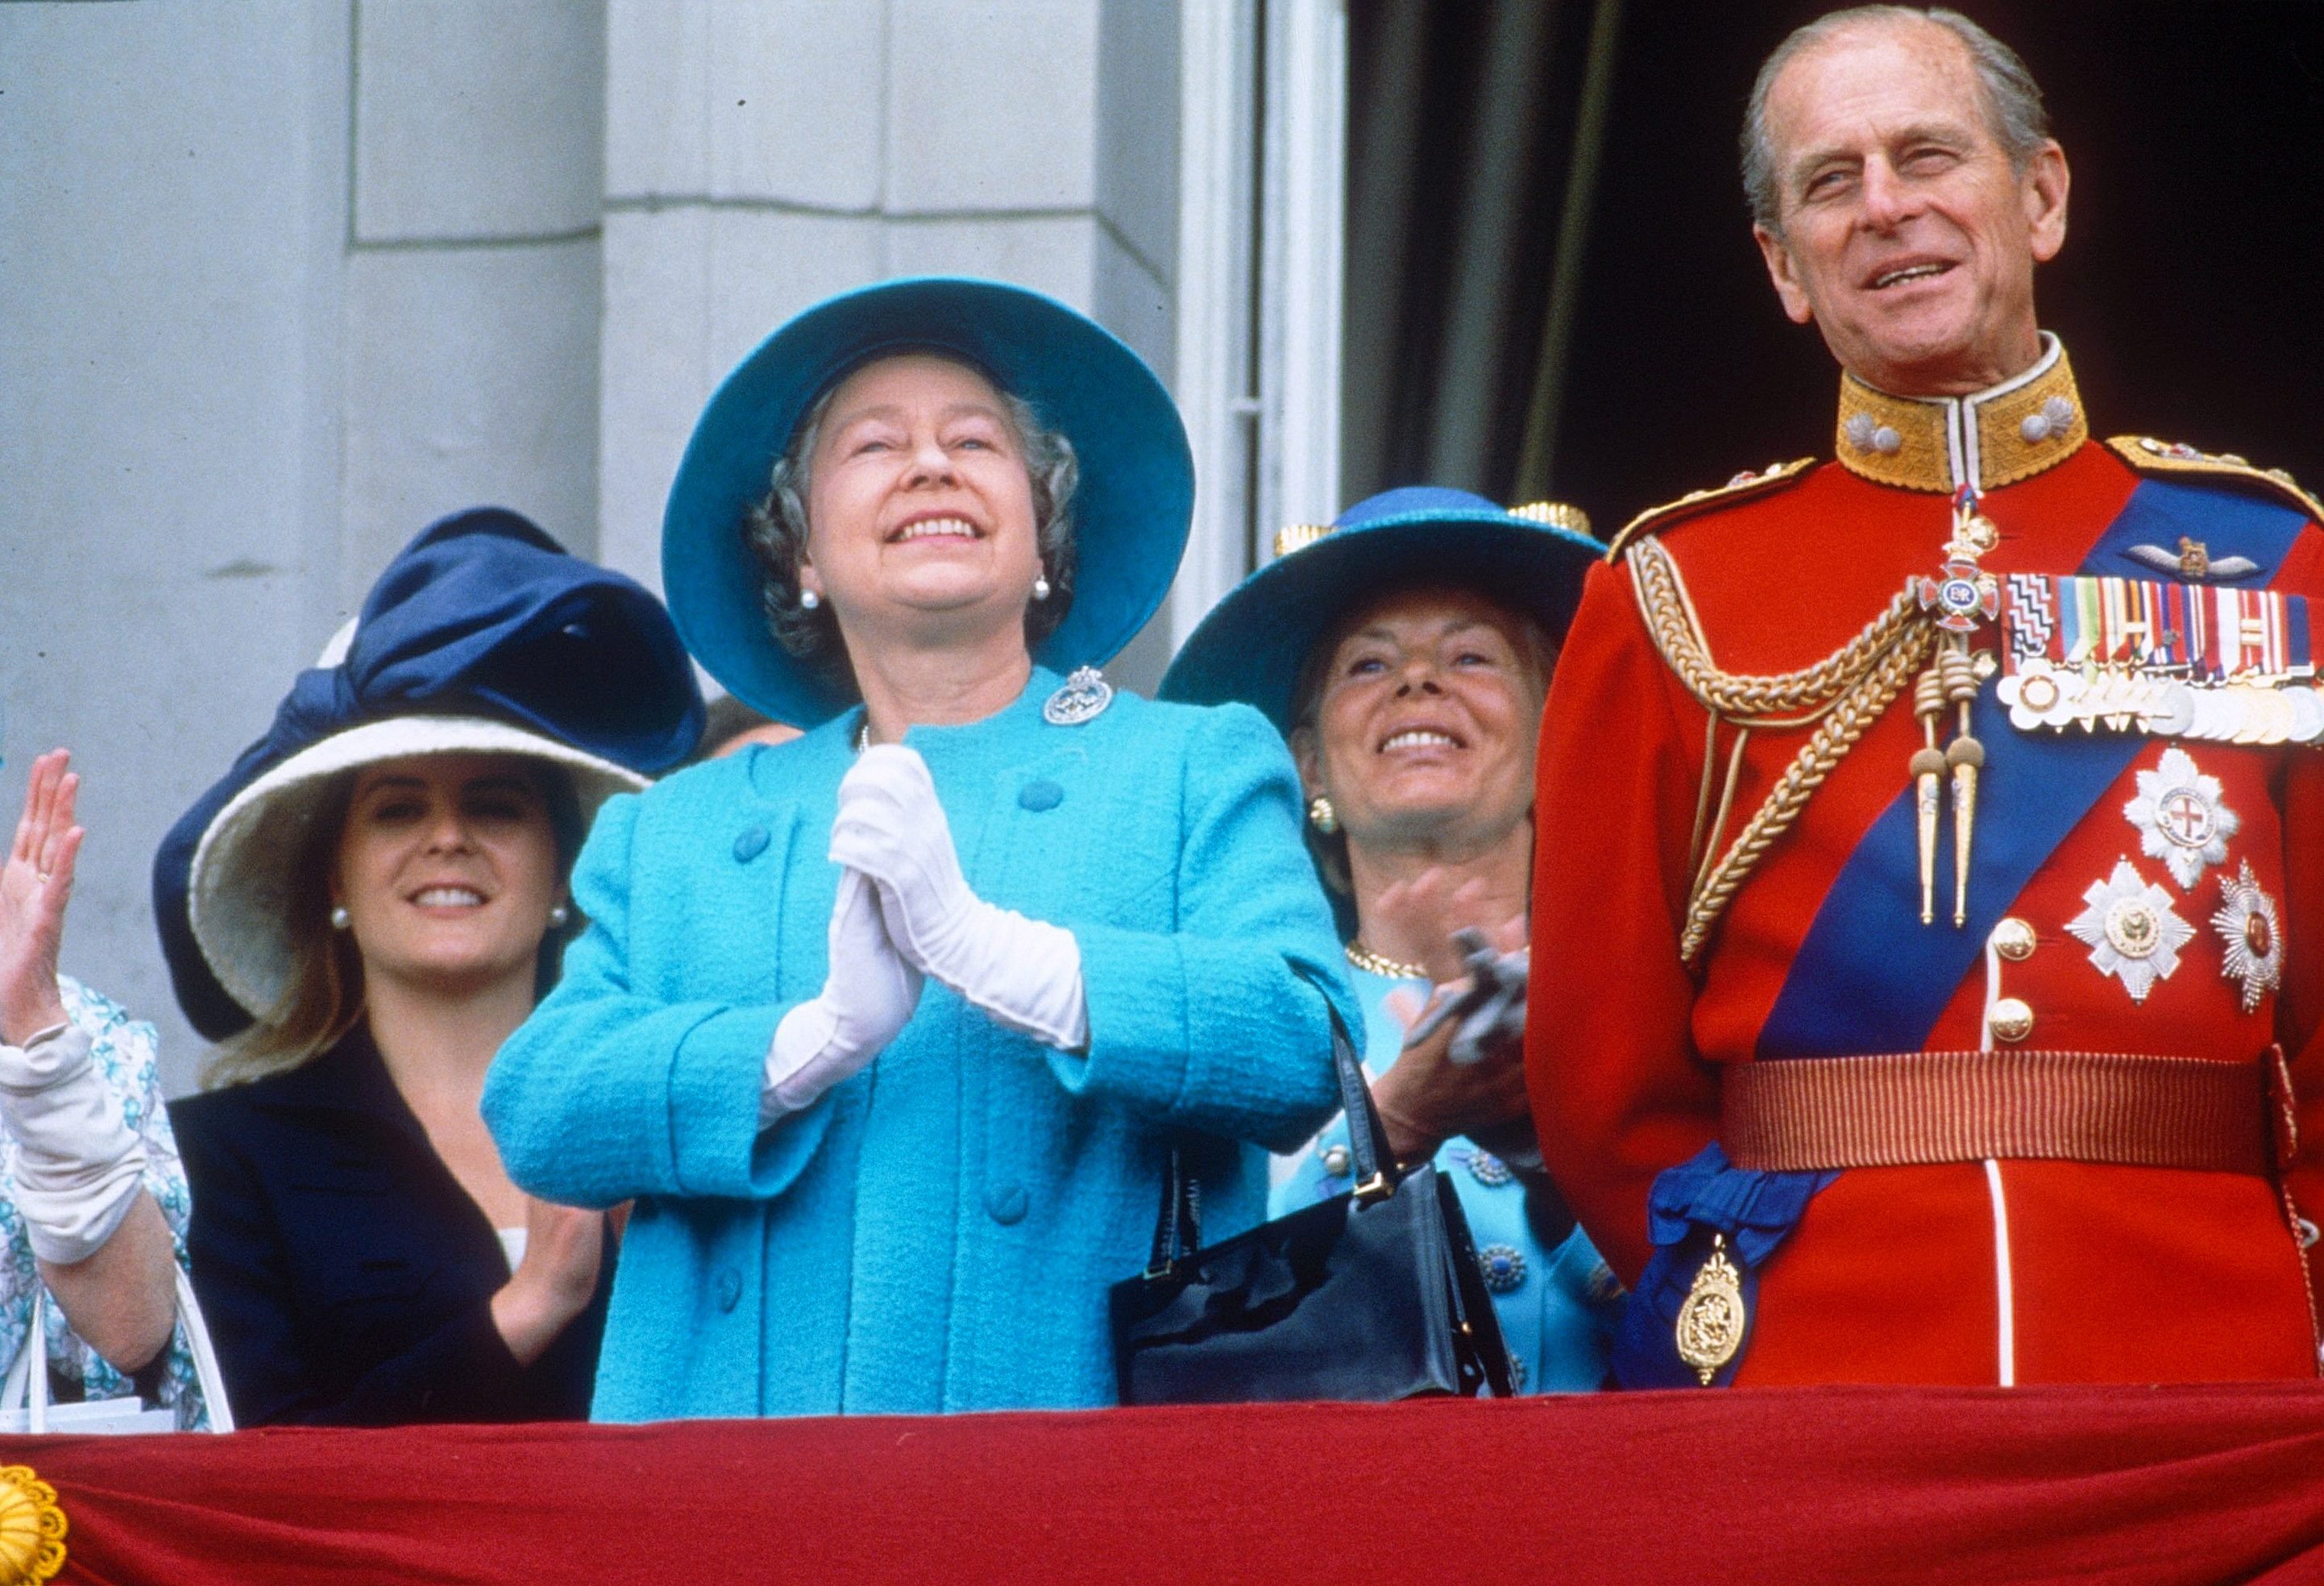 TROOPING THE COLOUR, BUCKINGHAM PALACE, LONDON, BRITAIN - 1993